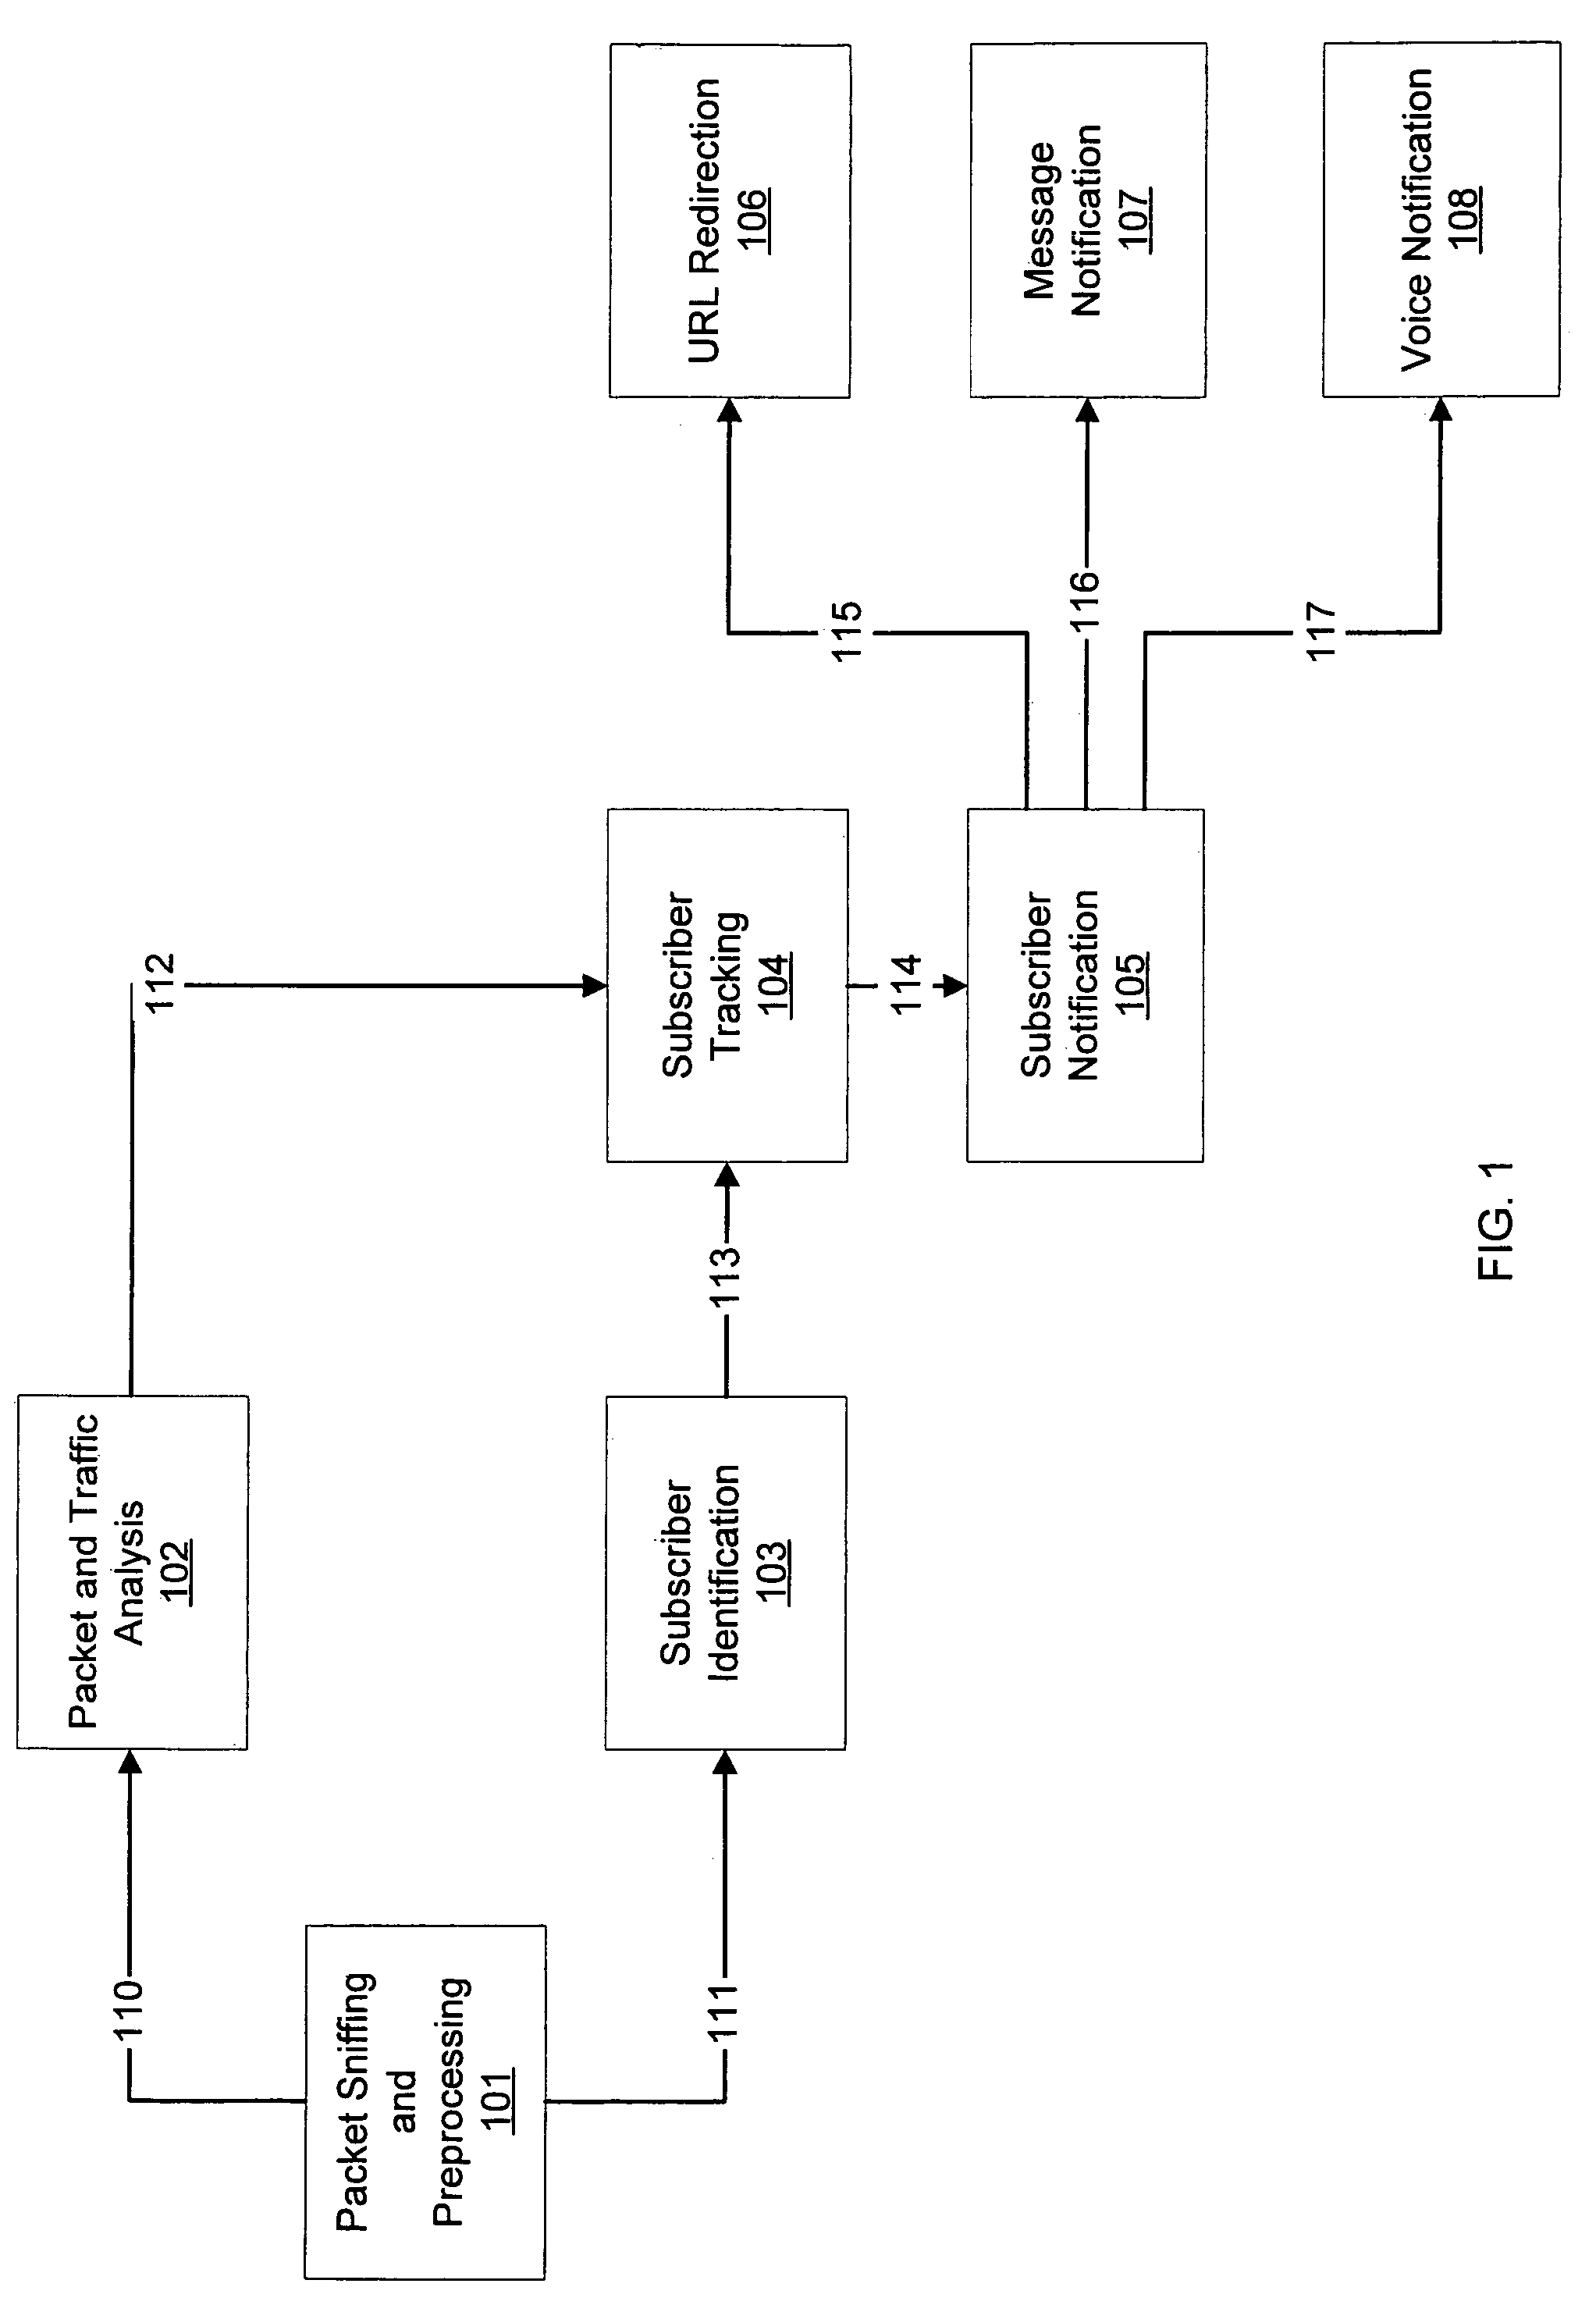 Method for malicious traffic recognition in IP networks with subscriber identification and notification